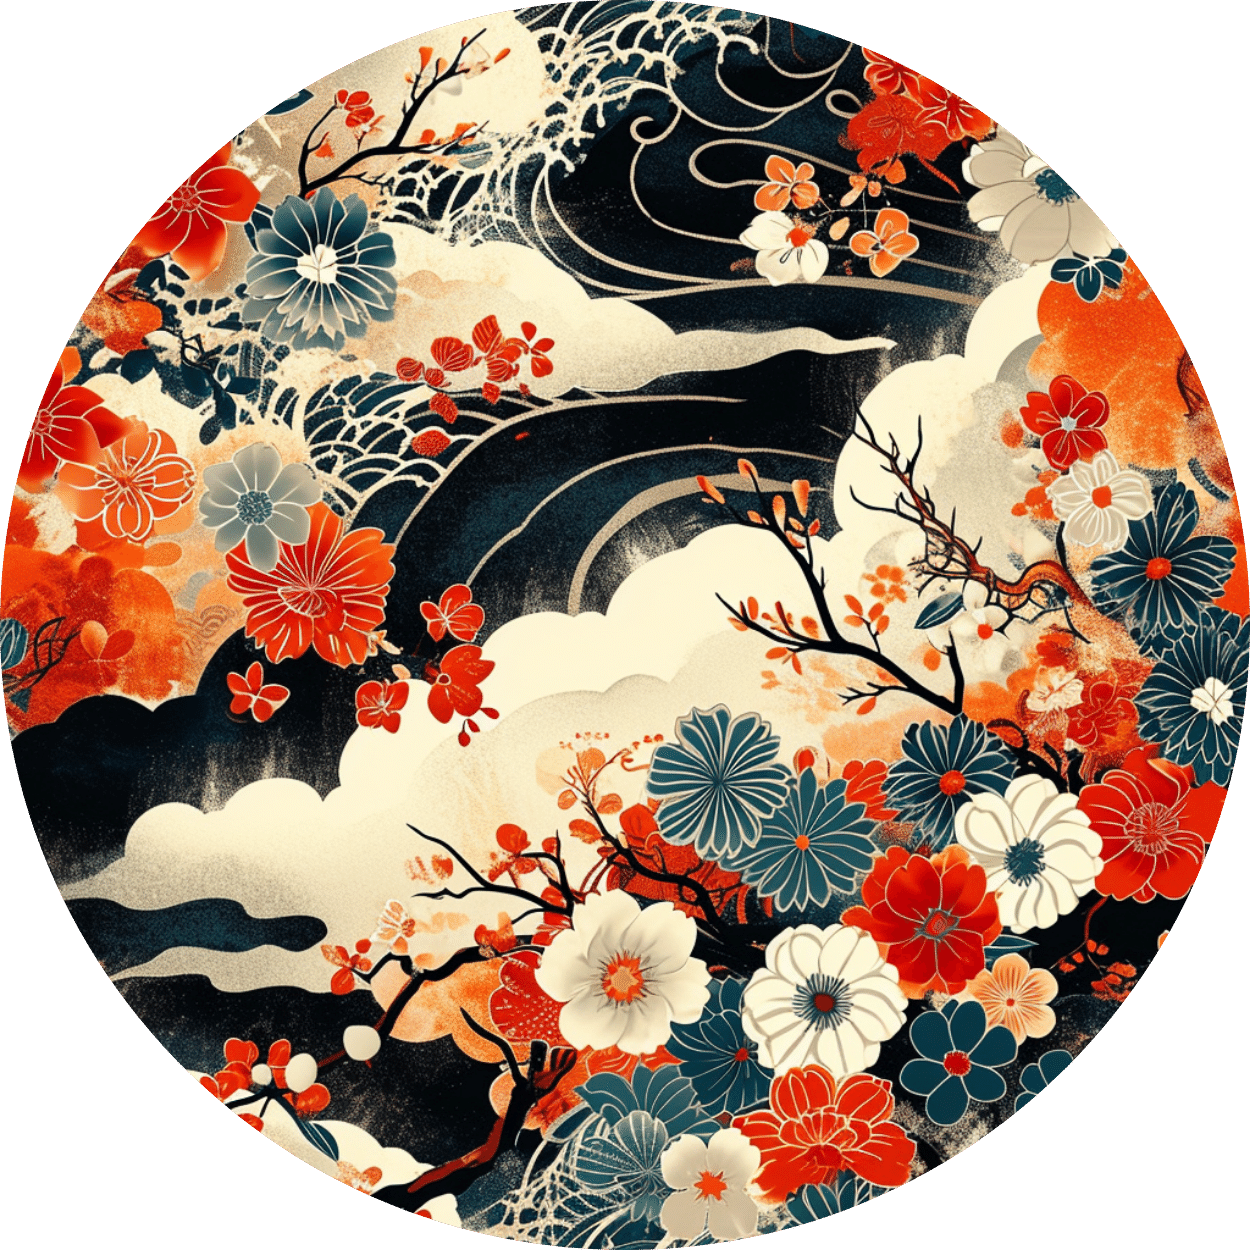 East Asian Elegance Circular Wall Mural - Lux Label Labs | Cultural Sophistication